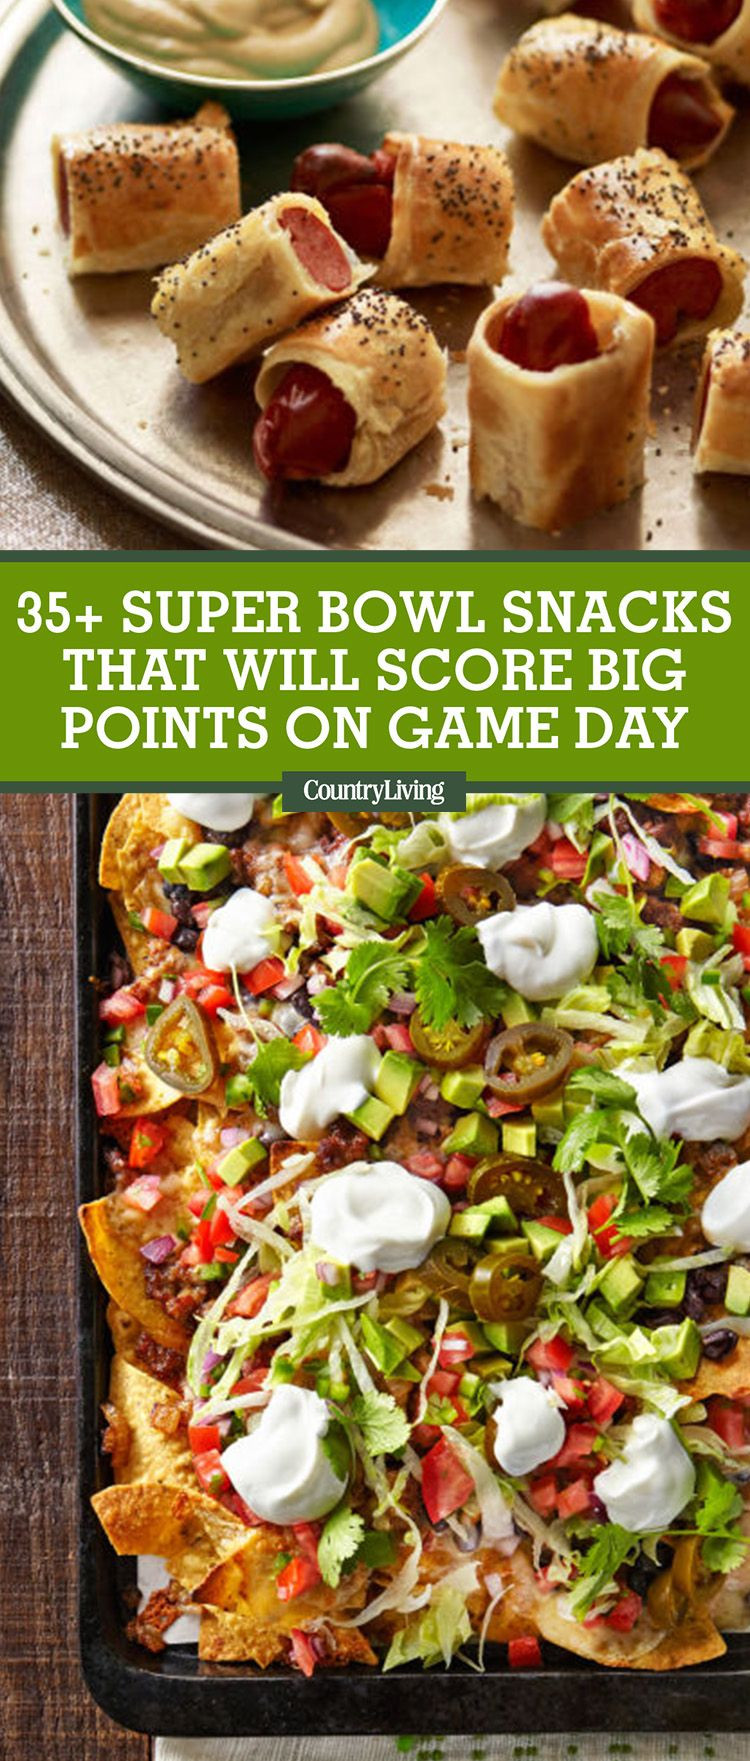 Superbowl Healthy Appetizers
 Your Super Bowl Crowd Will Devour These Delicious Game Day